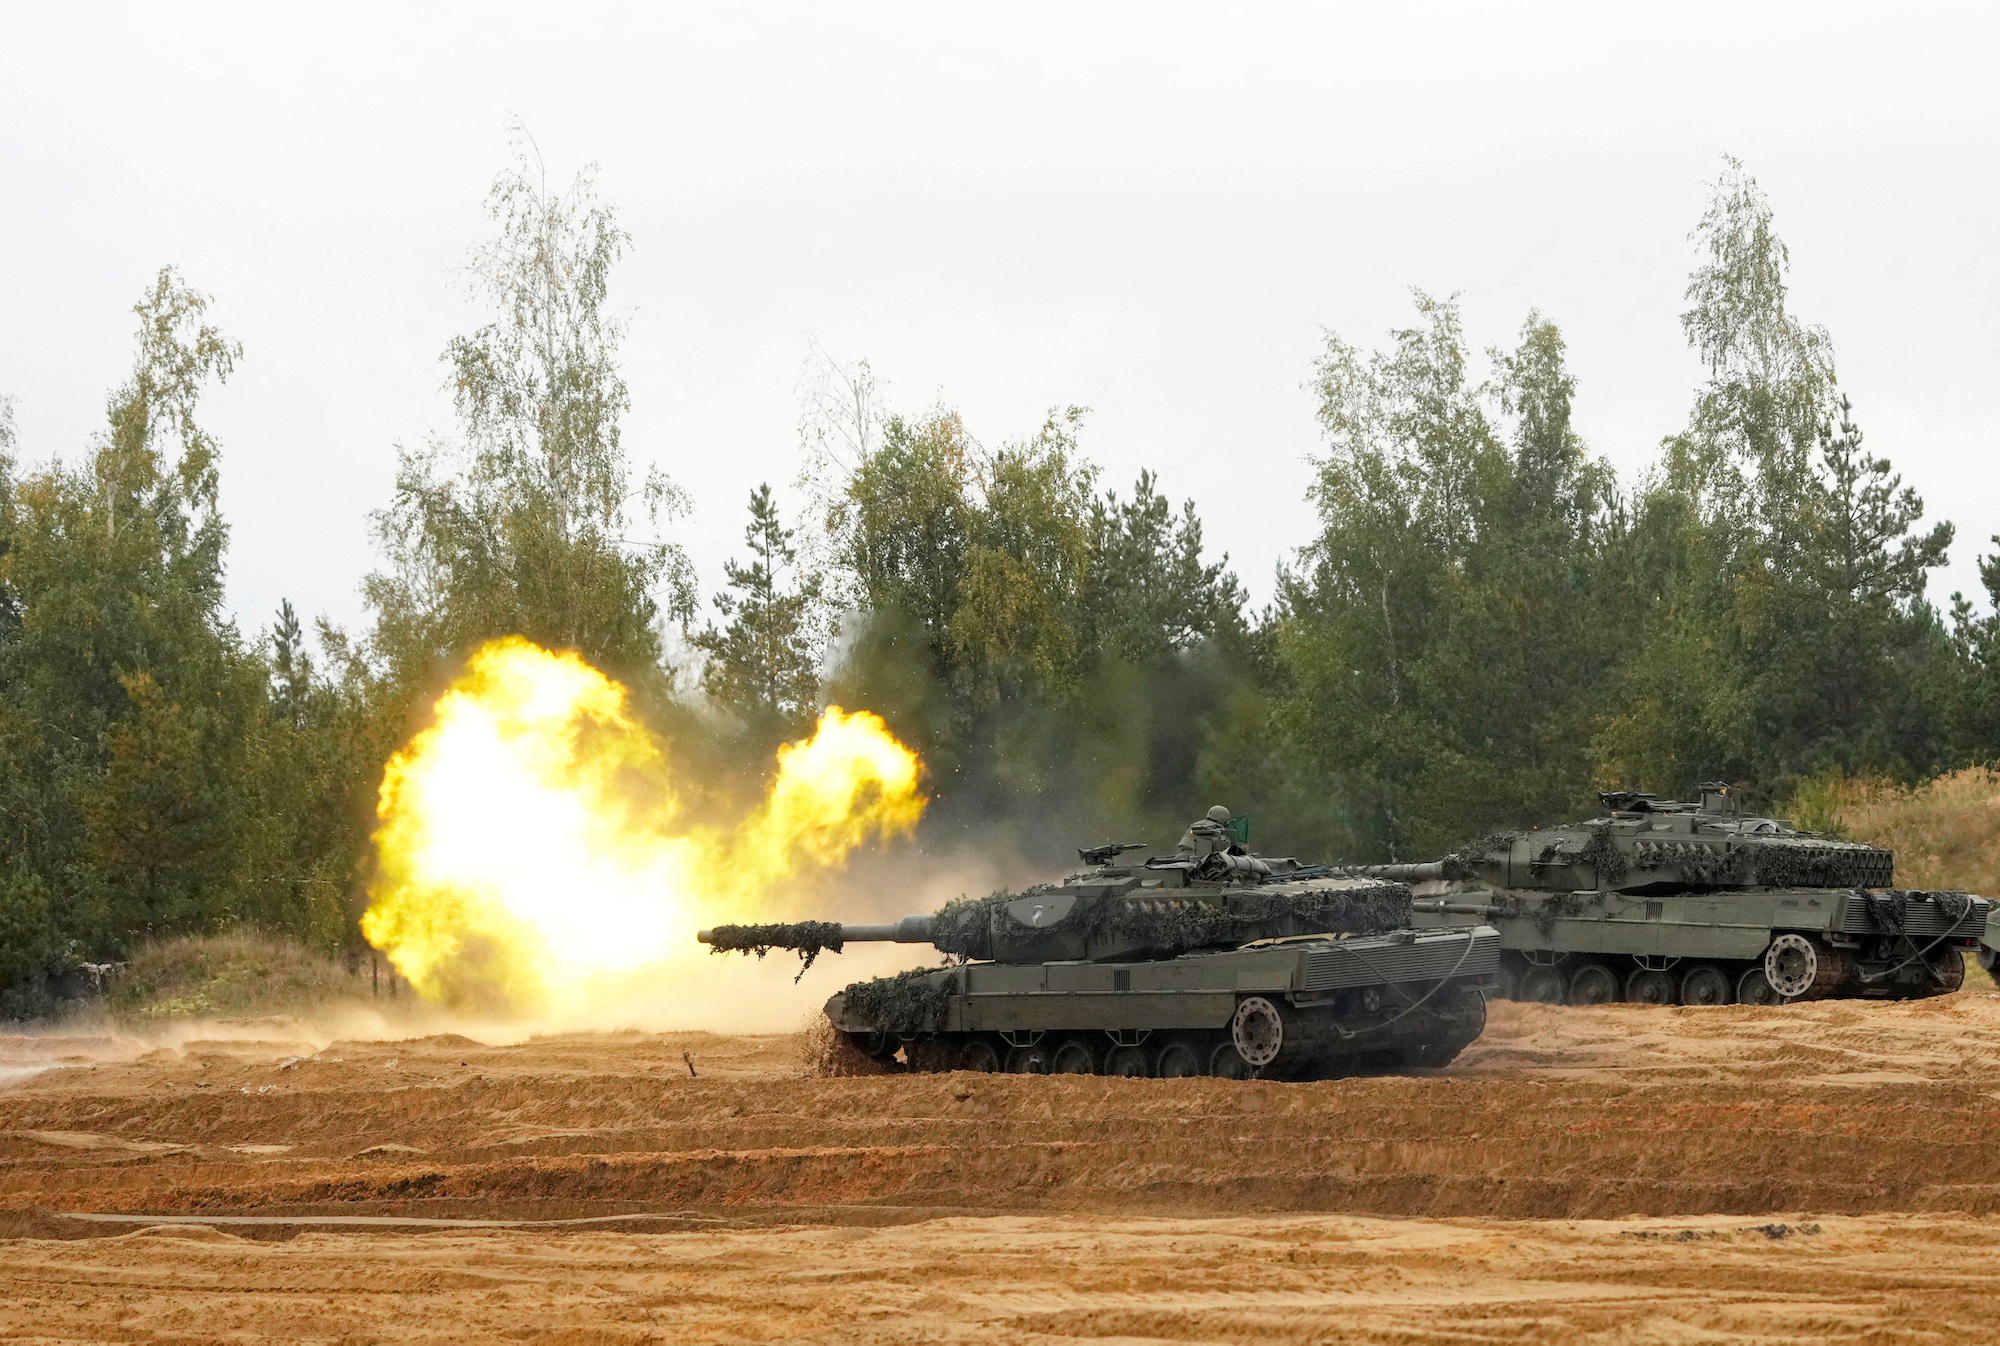 A Spanish Army Leopard 2 tank fires during the final stages of a military exercise in Latvia on September 29, 2022.